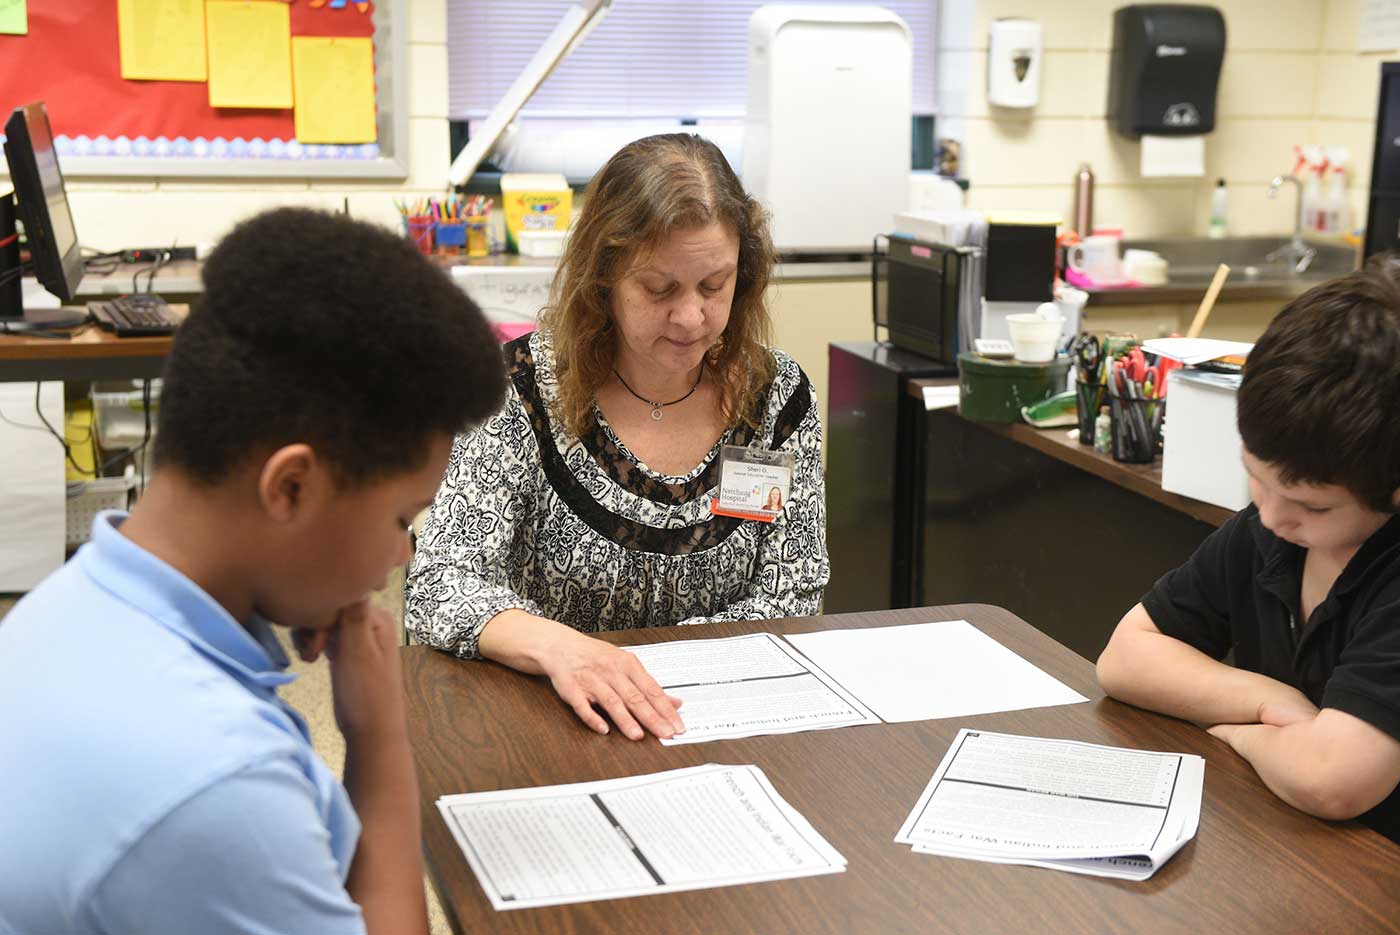 Natchaug teacher works with two students while they read packets during class